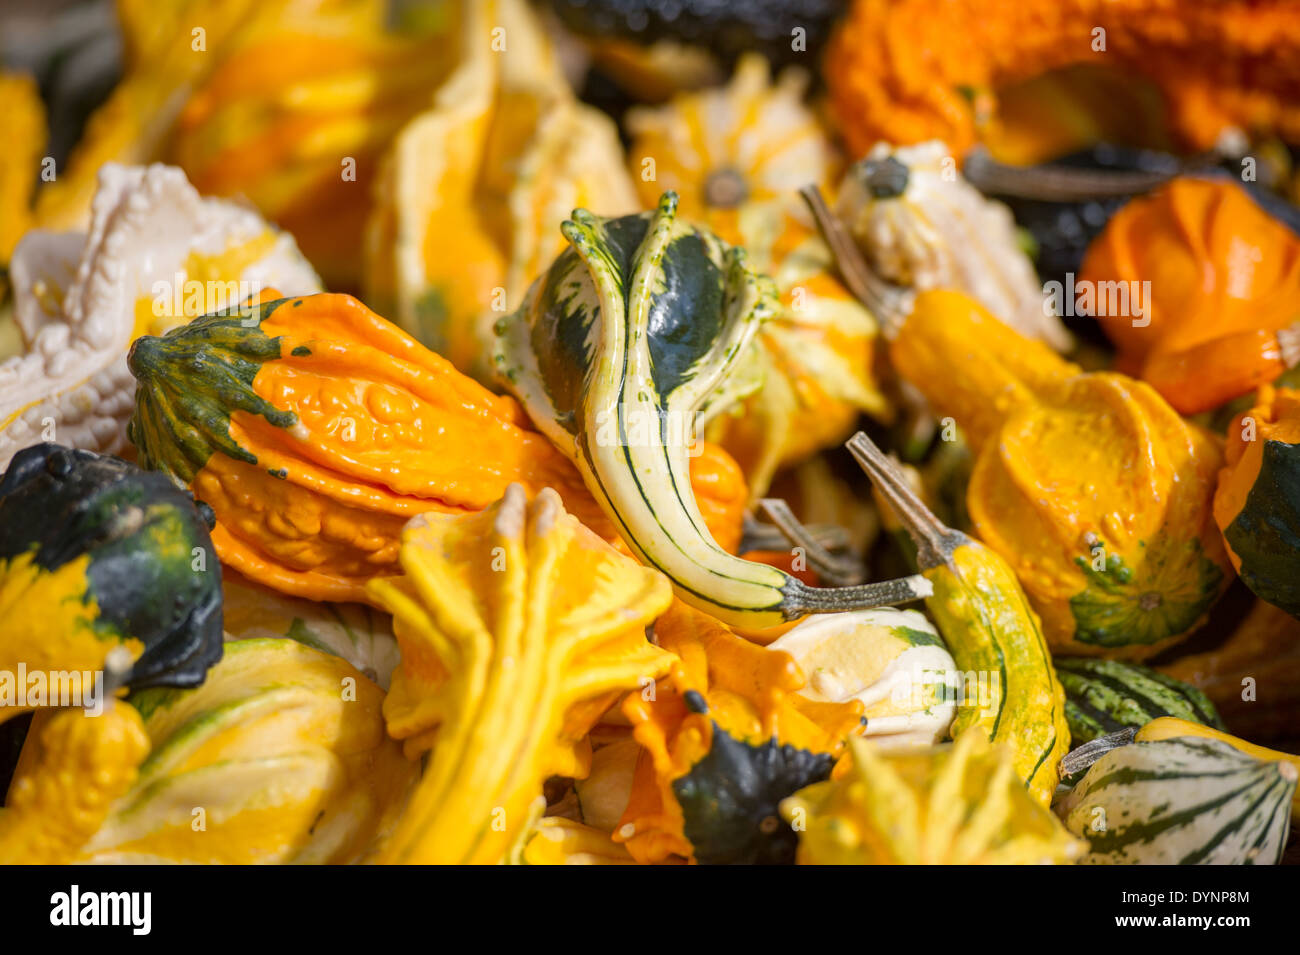 A pile of ornamental squash in York PA Stock Photo